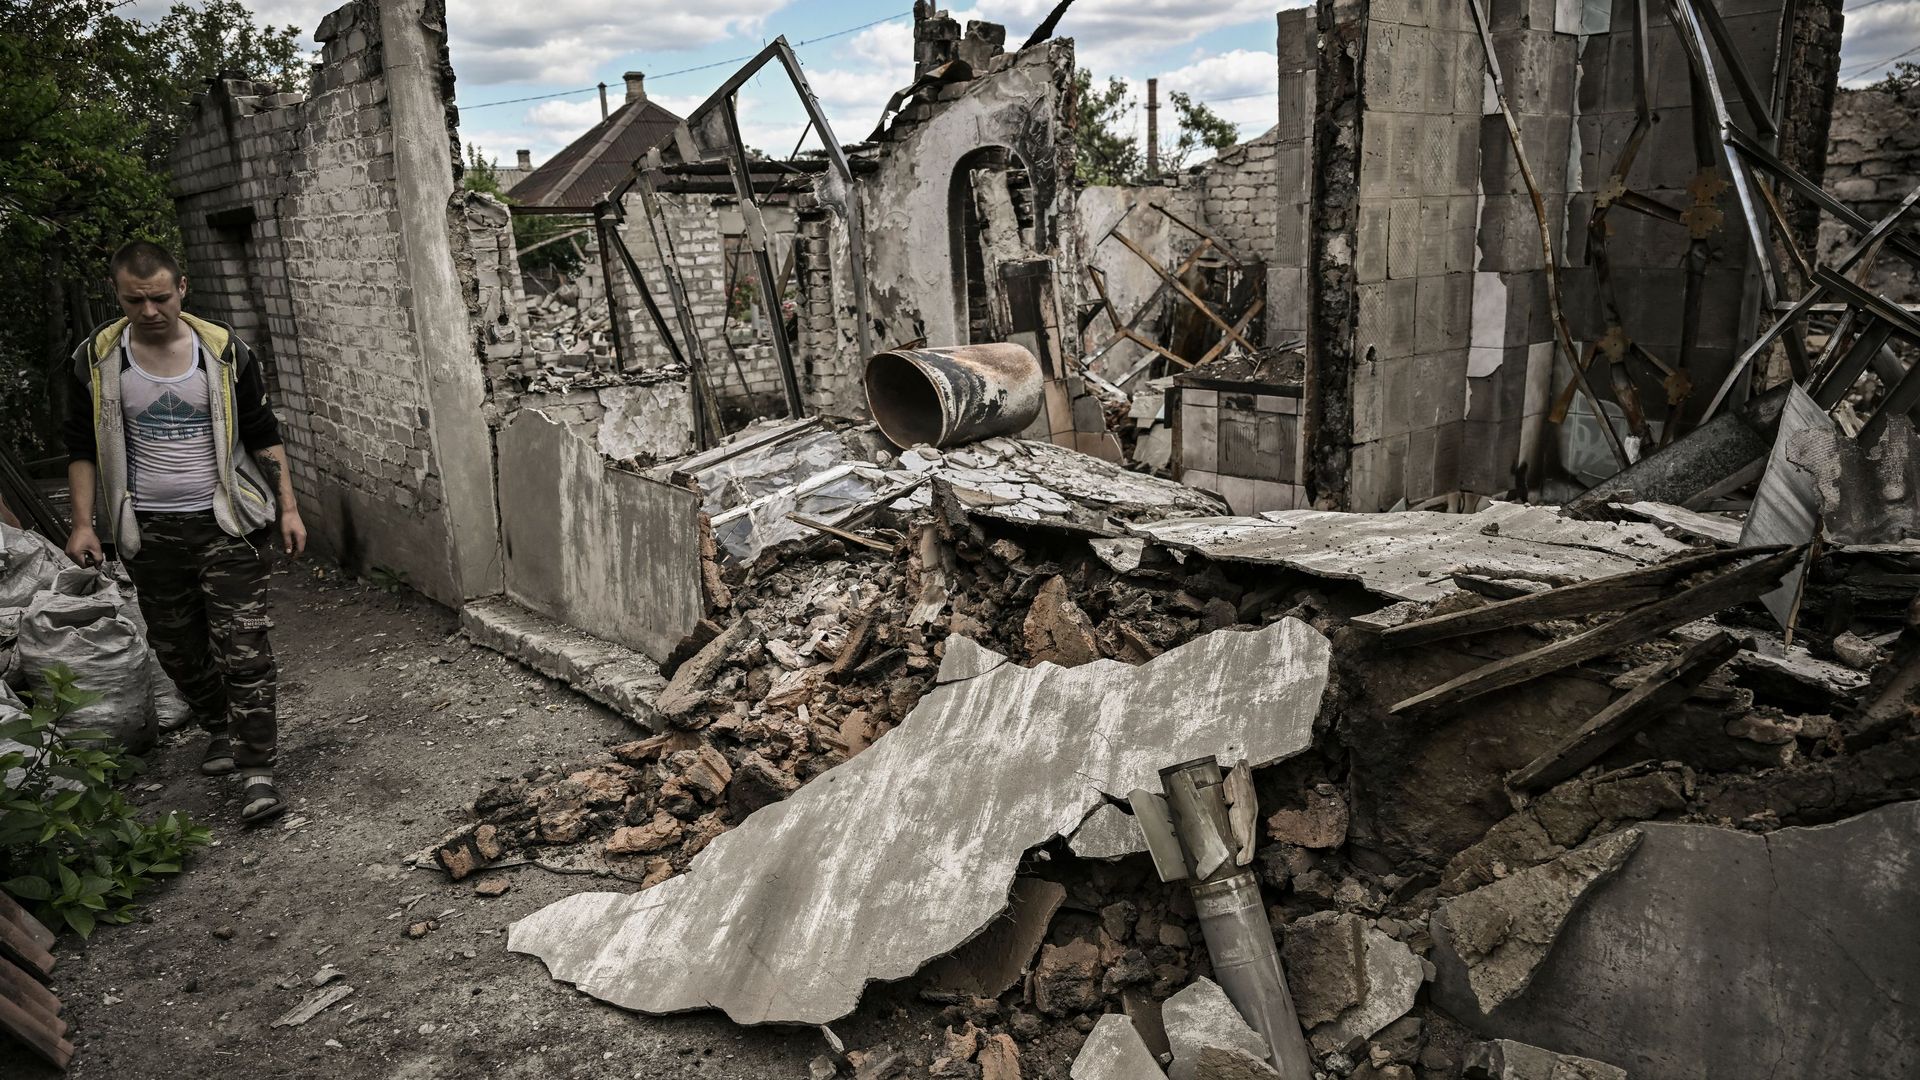 Ivan Sosnin, 19, walks next to his destroyed house in the city of Lysychansk at the eastern Ukrainian region of Donbas on June 7.